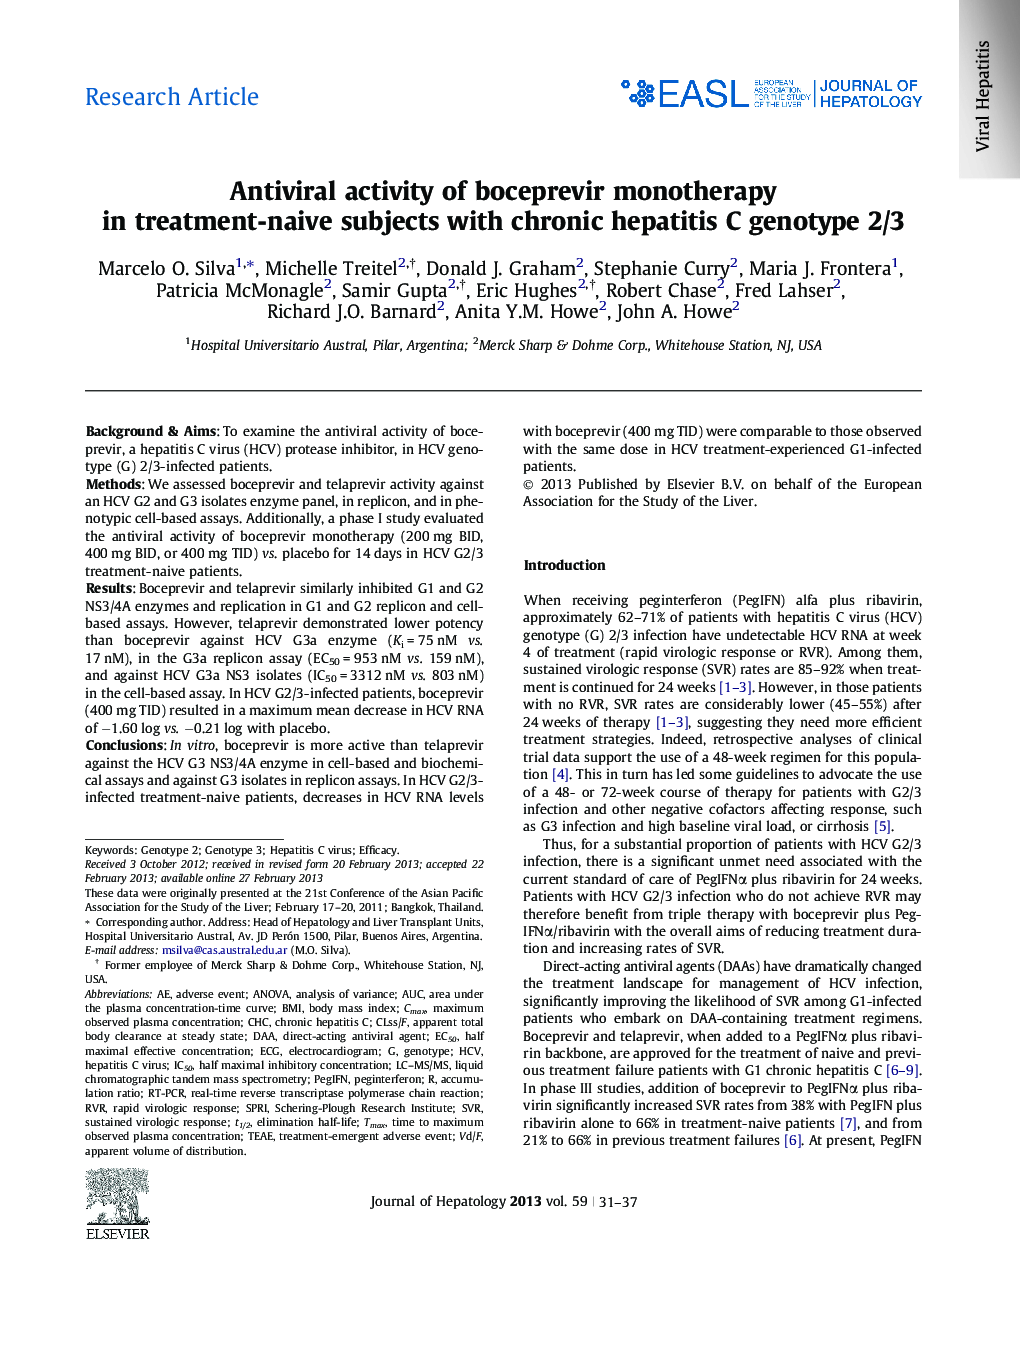 Research ArticleAntiviral activity of boceprevir monotherapy in treatment-naive subjects with chronic hepatitis C genotype 2/3